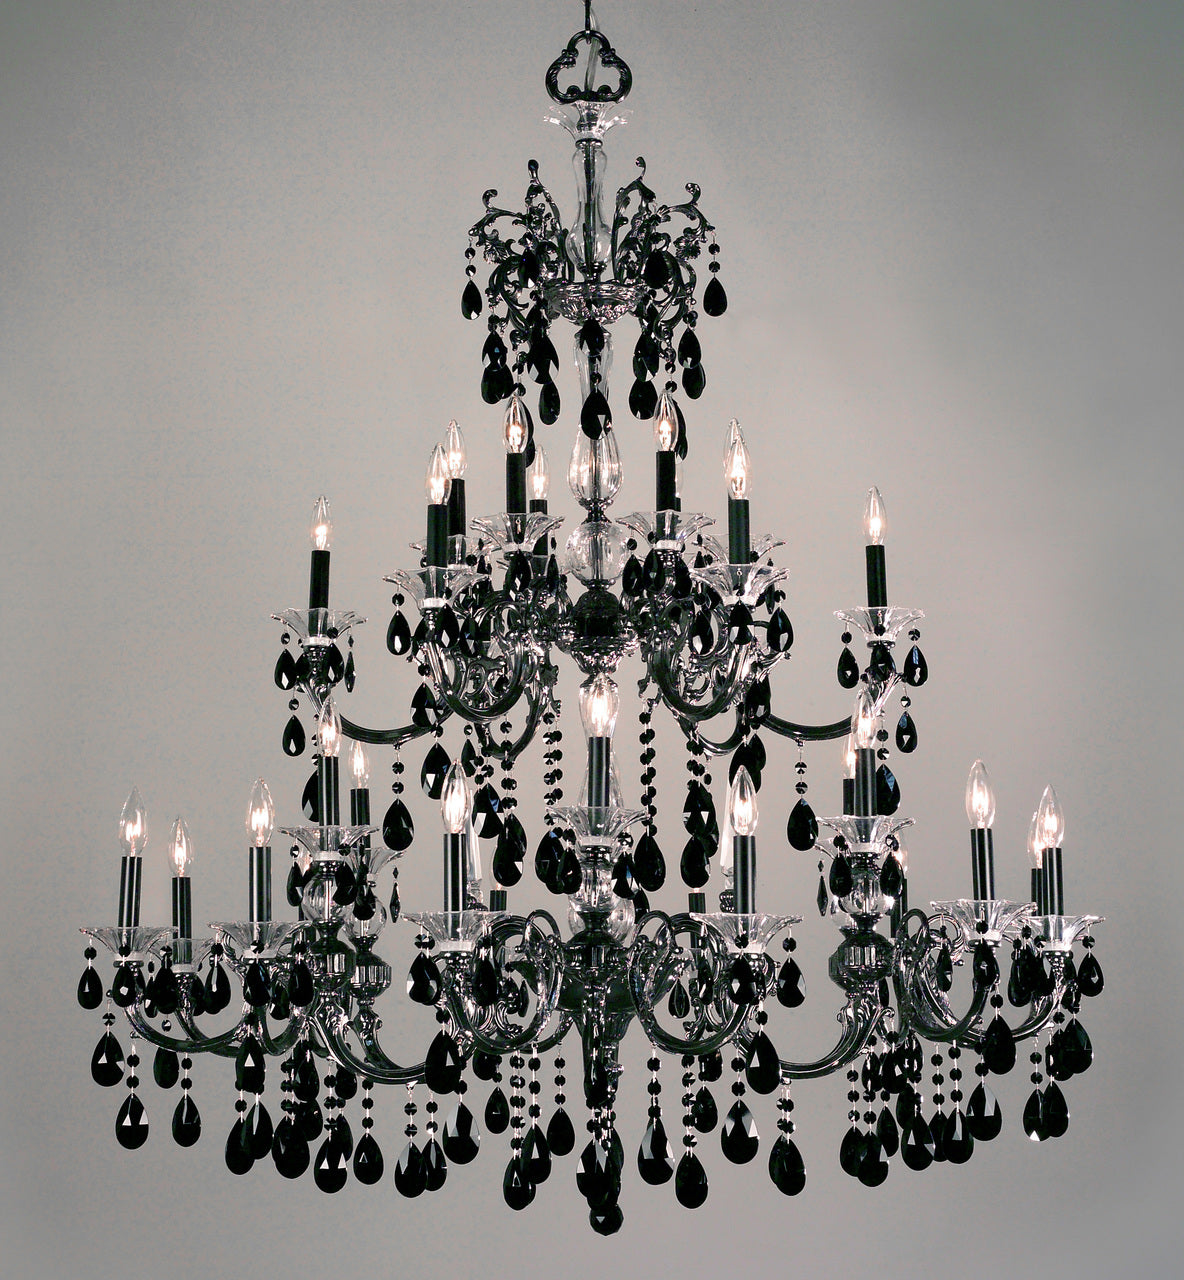 Classic Lighting 57060 CHP S Via Lombardi Crystal Chandelier in Champagne Pearl (Imported from Spain)